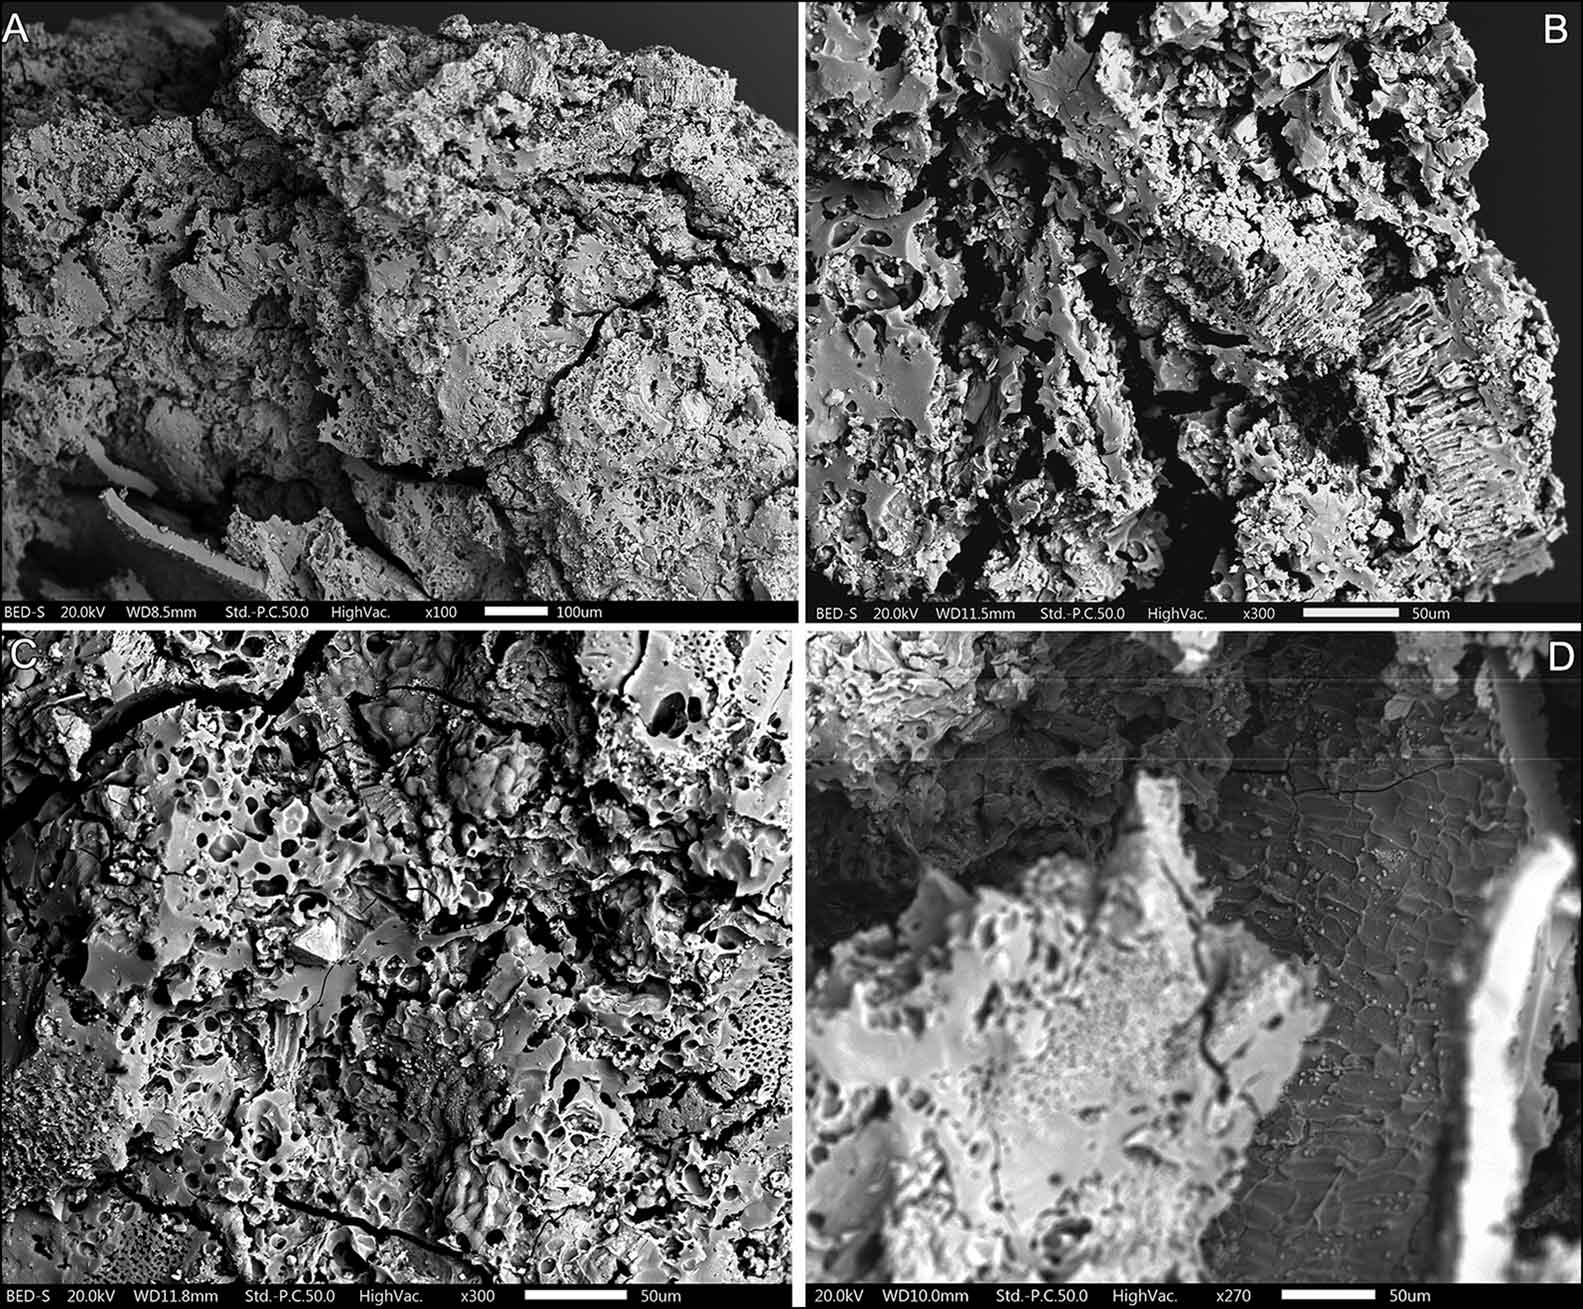 Four panels showing micrographs of chunky food stuff